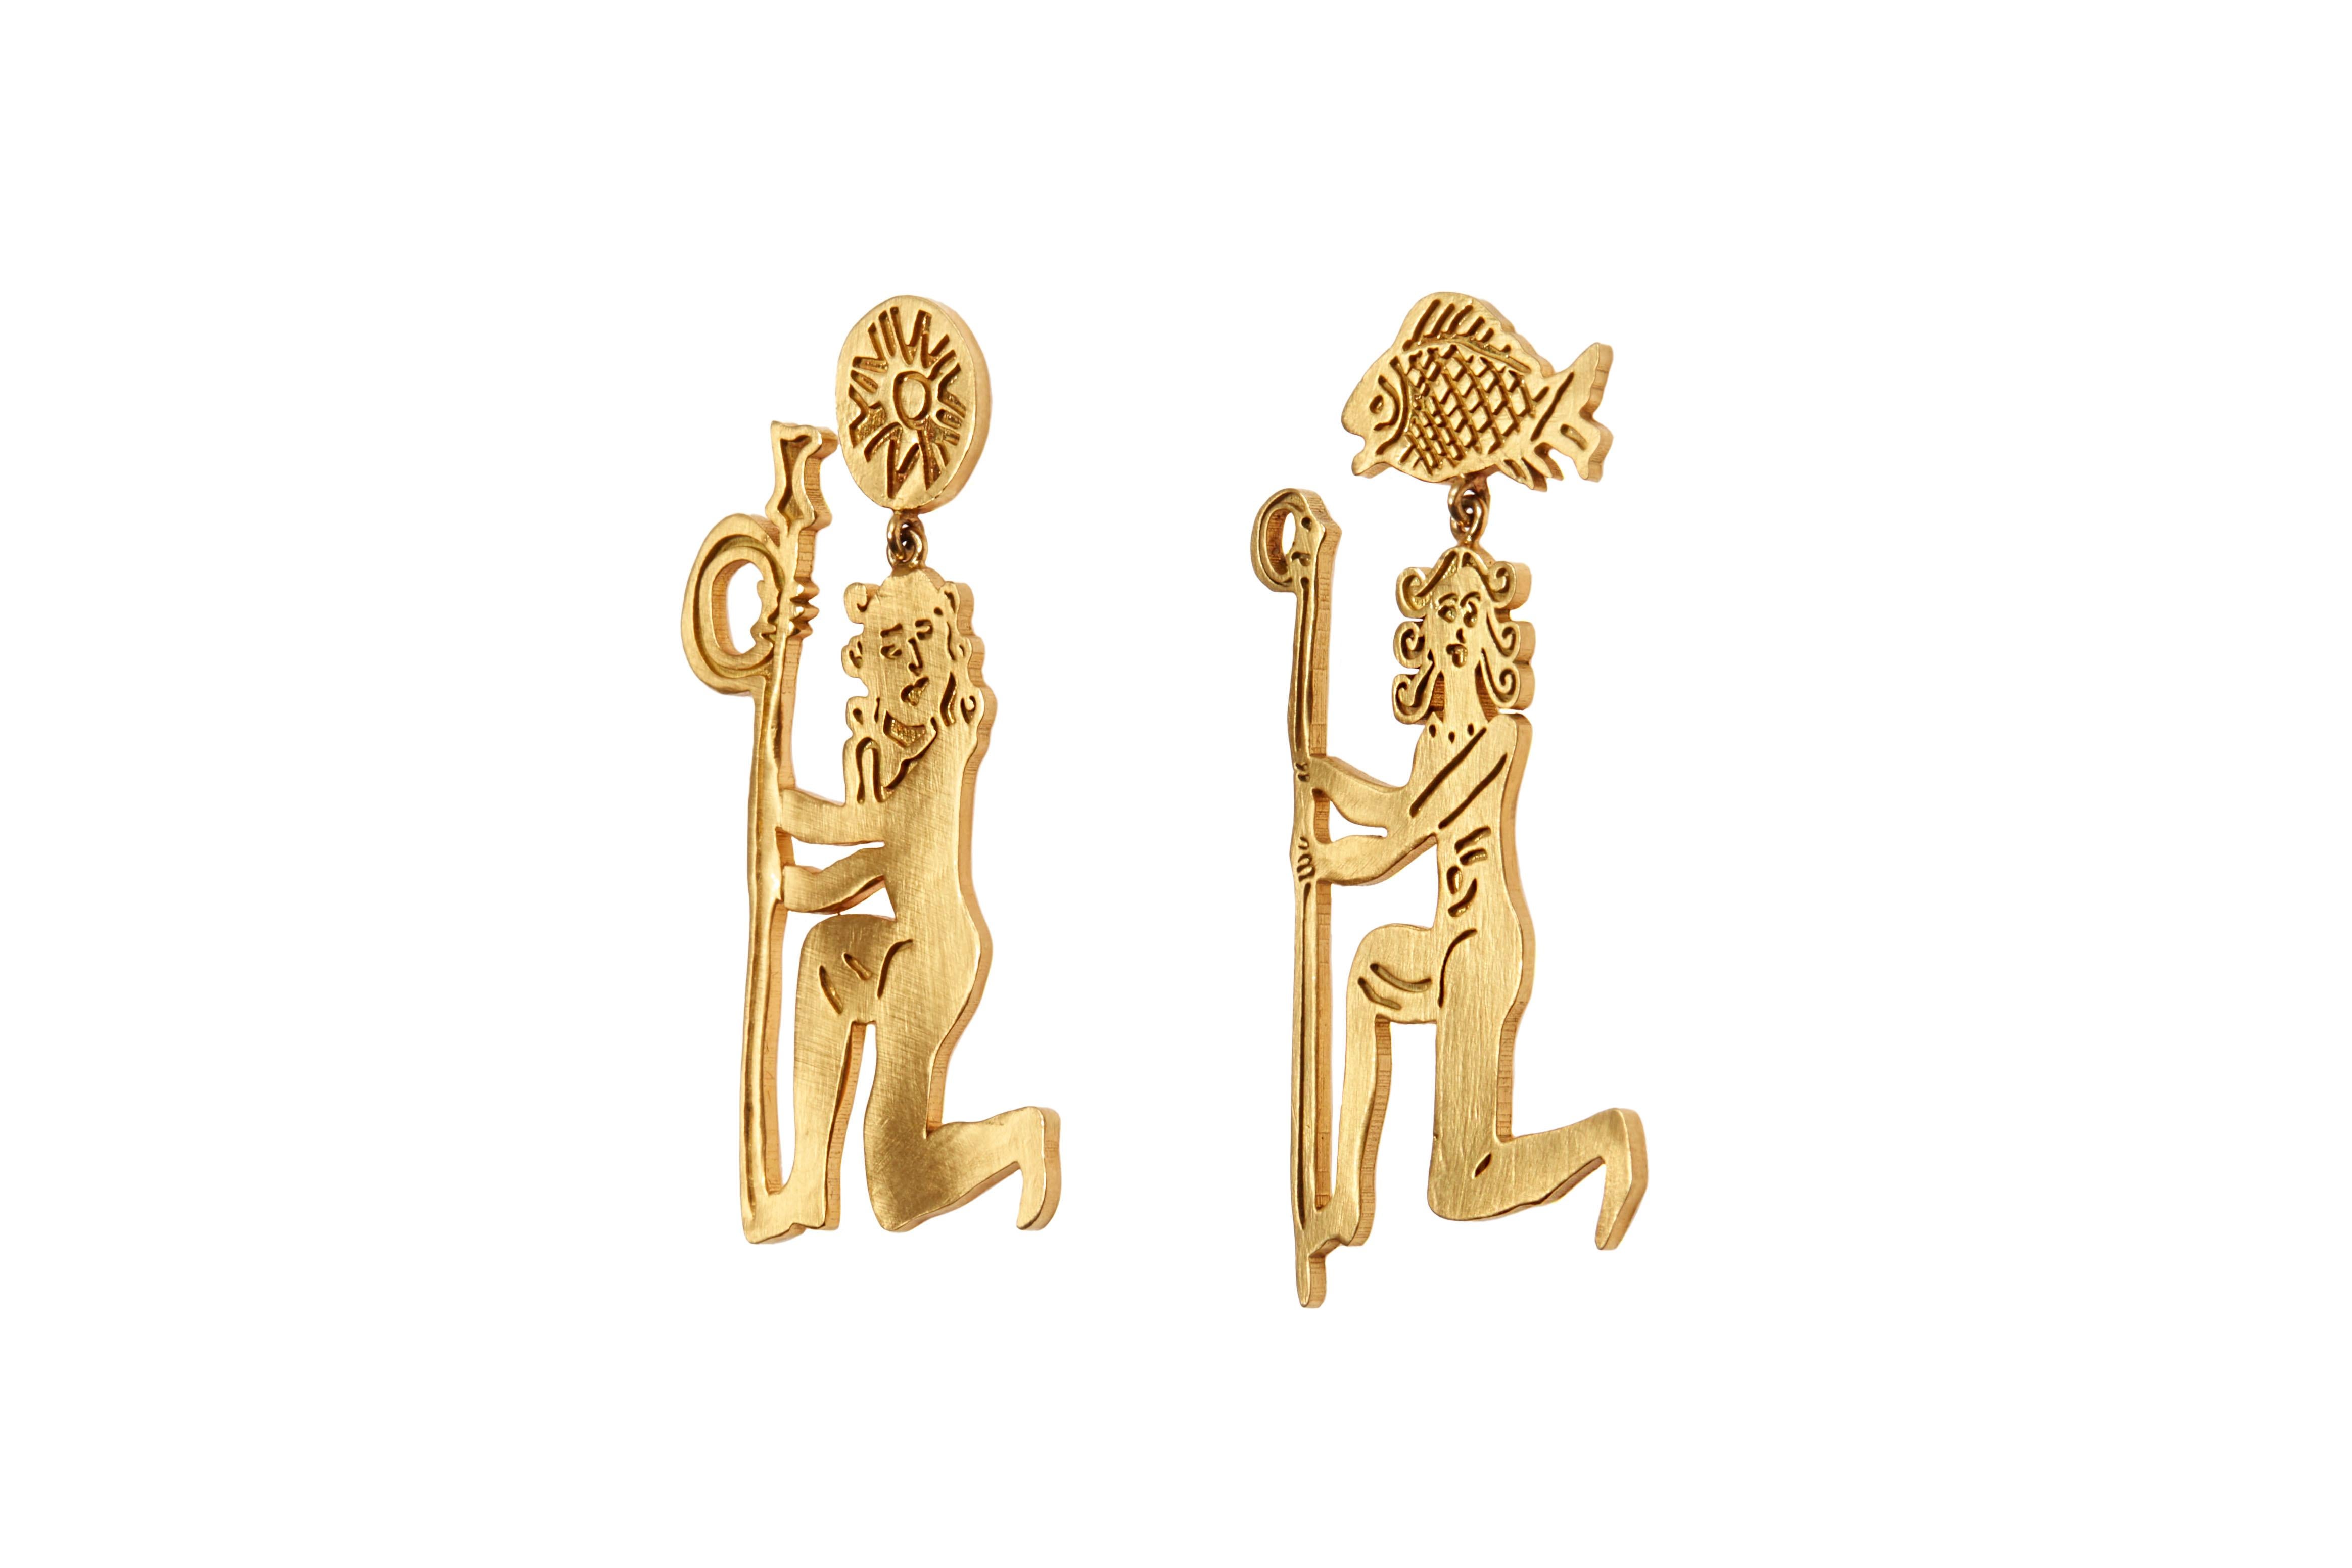 Darius Jewels Sisters Ear Pendants are crafted entirely by hand and includes the designer's signature earring backs. Each pair of Sisters Ear Pendants are one of a kind.

18K Yellow Gold